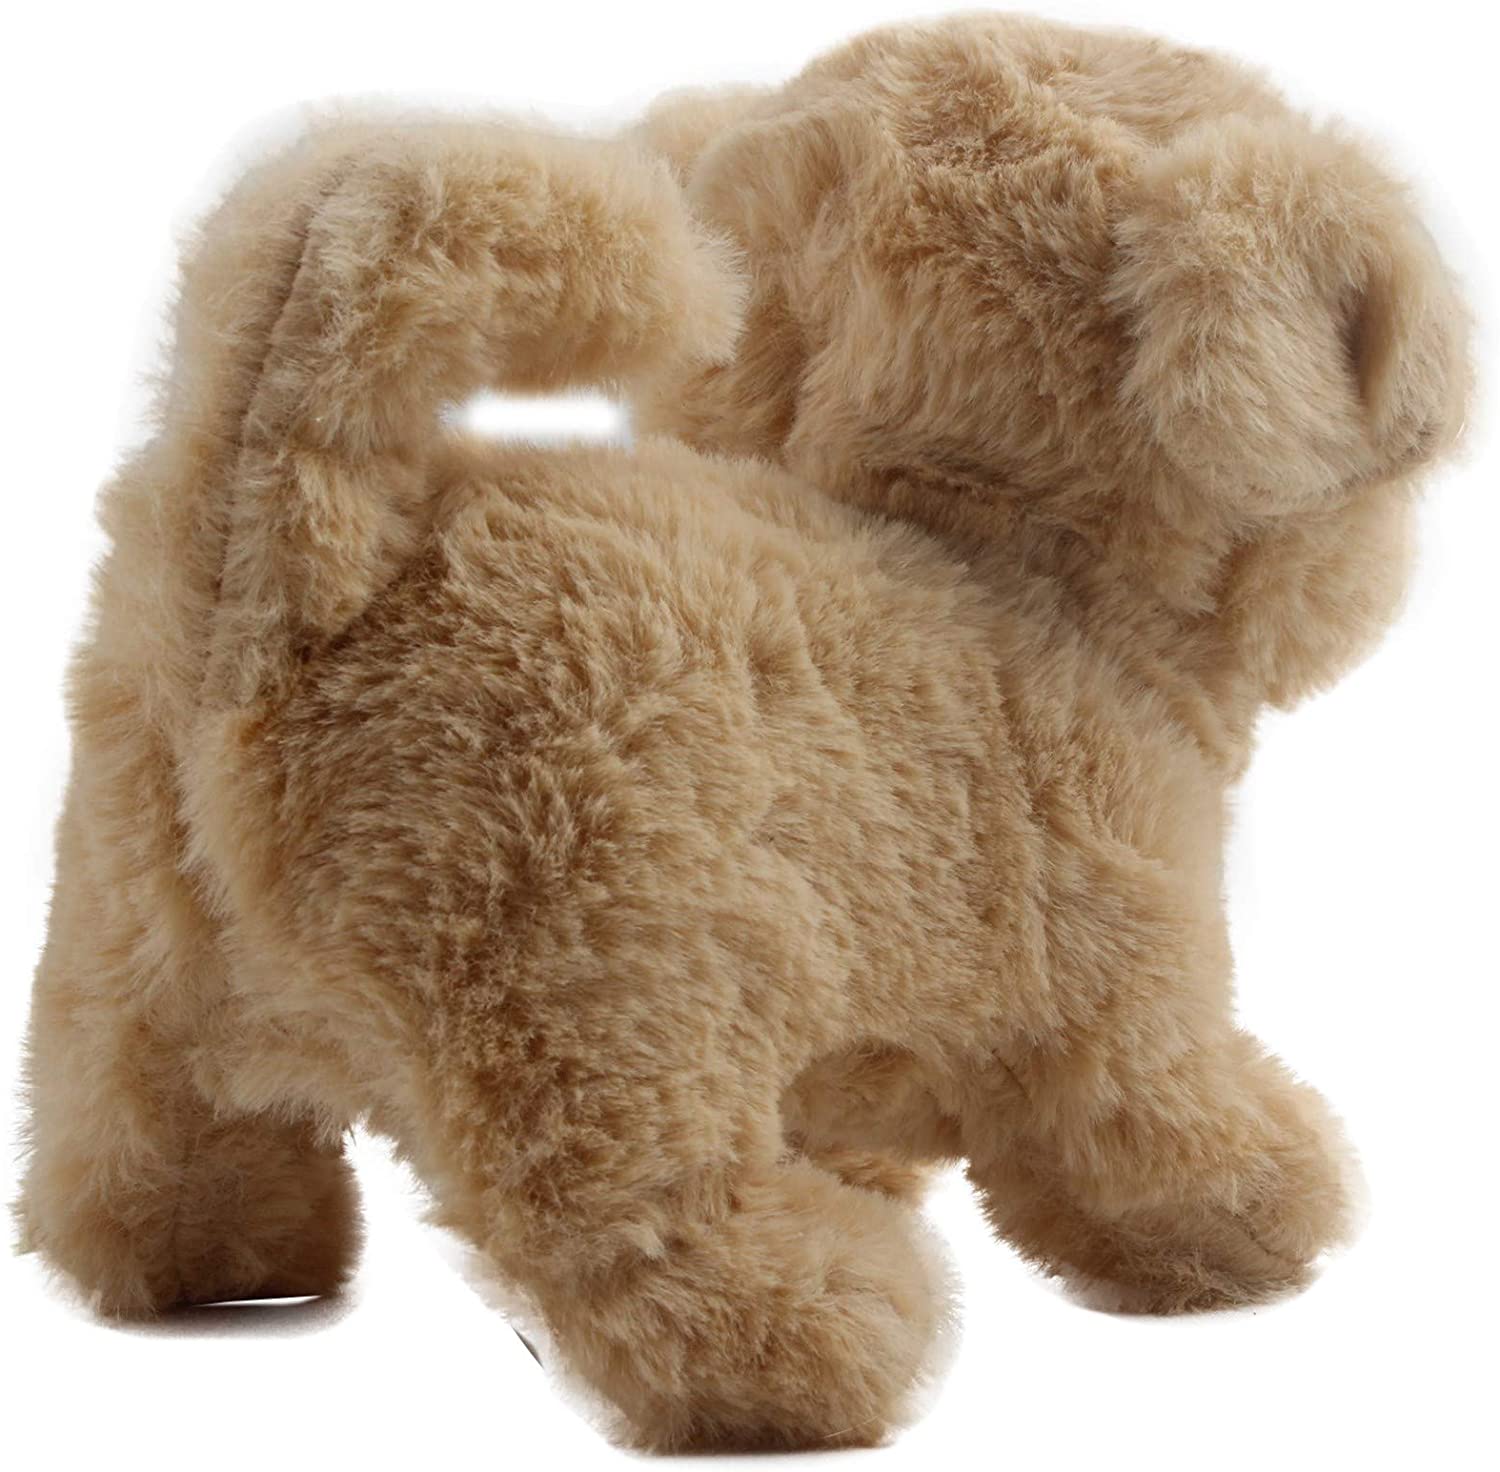 WAGS HIS TAIL BARKS HOURS OF FUN CUDDLE BUDDY TOY ANIMATED PETE THE DOG WALKS 